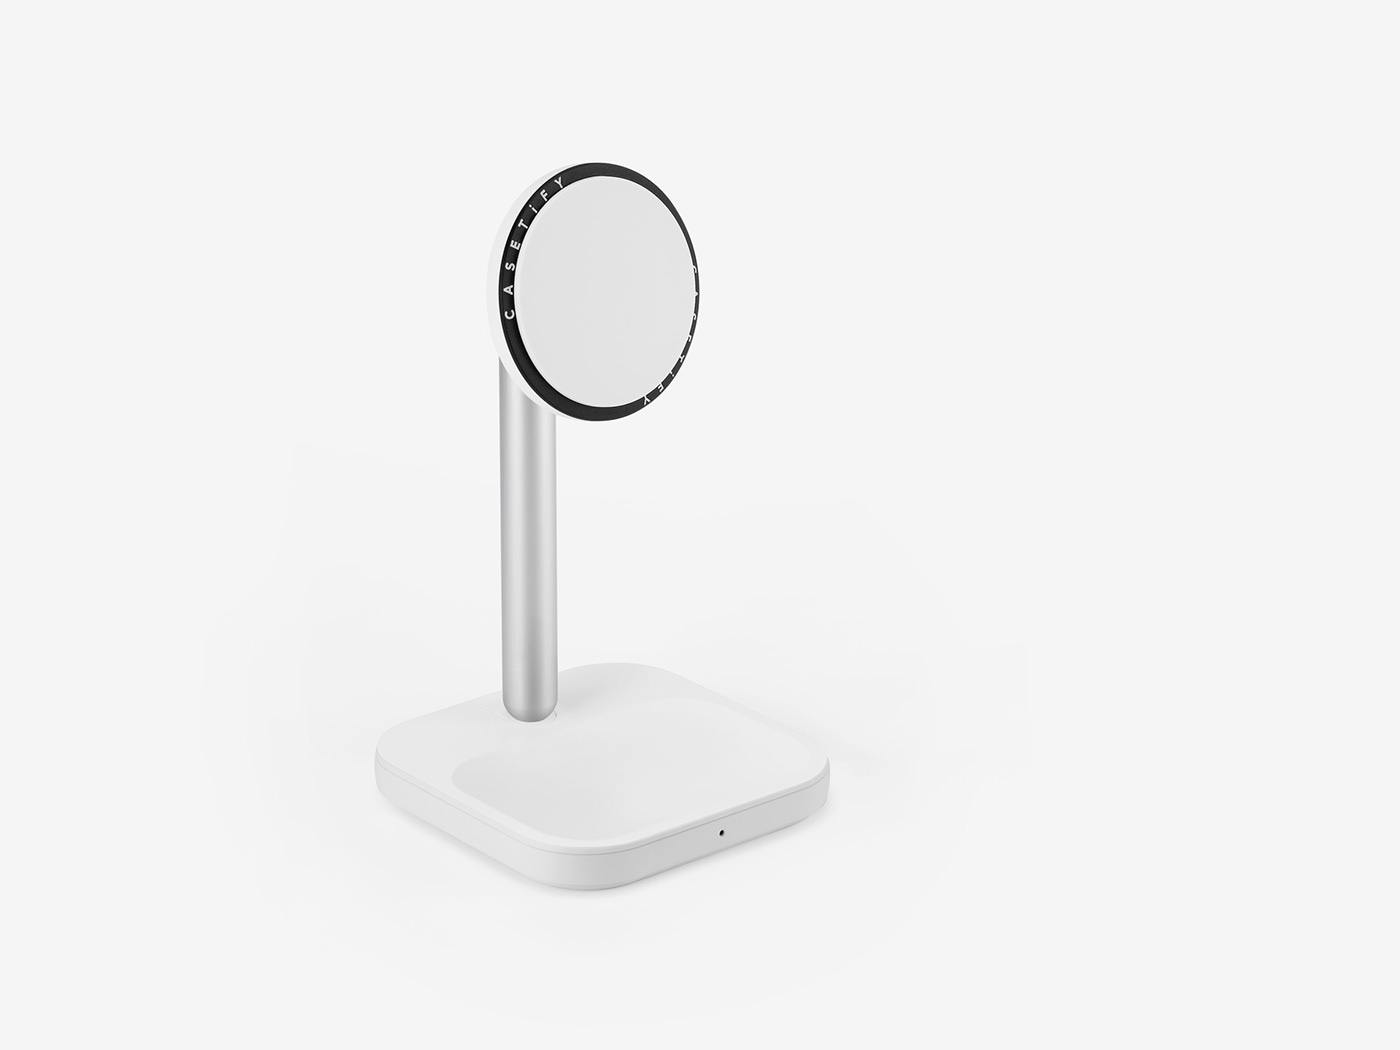 charger Stand accessories industrial design  product design  cmf phone casetify wireless Hong Kong